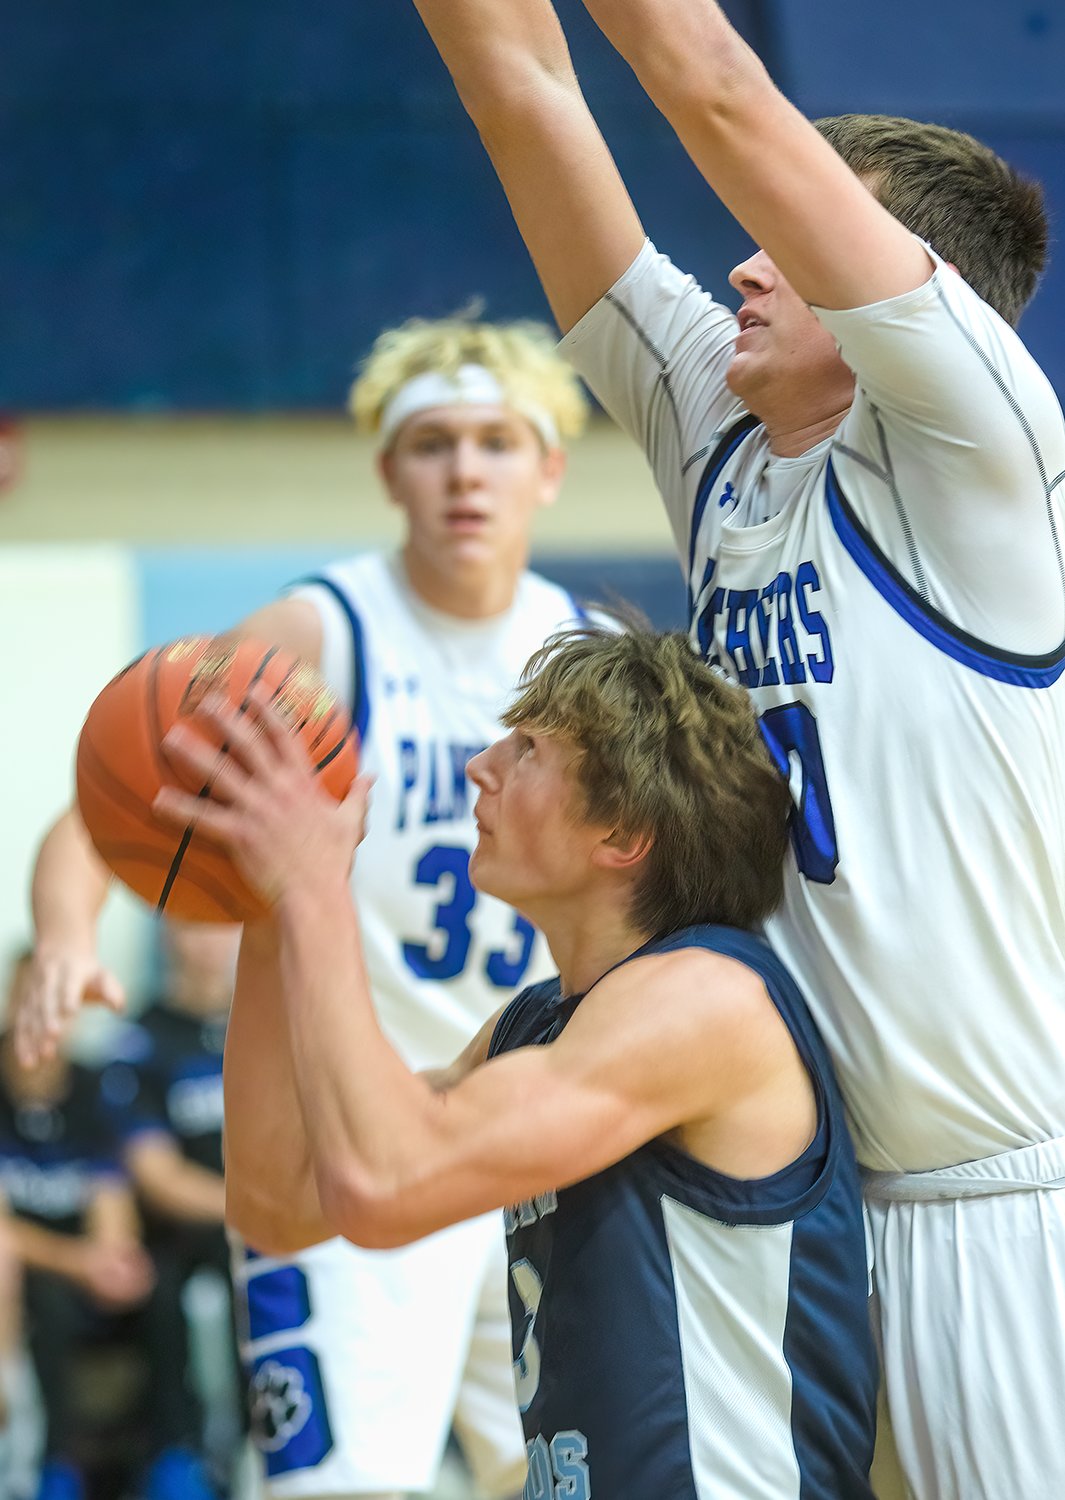 The Grizzlies' Jonah Burnett ball fakes before going up for a shot against 6'10" Austin Josephson of South Ridge. Burnett has been on a scoring tear the first two games of the season, nailing 22 points against the Panthers and 37 against Bigfork.